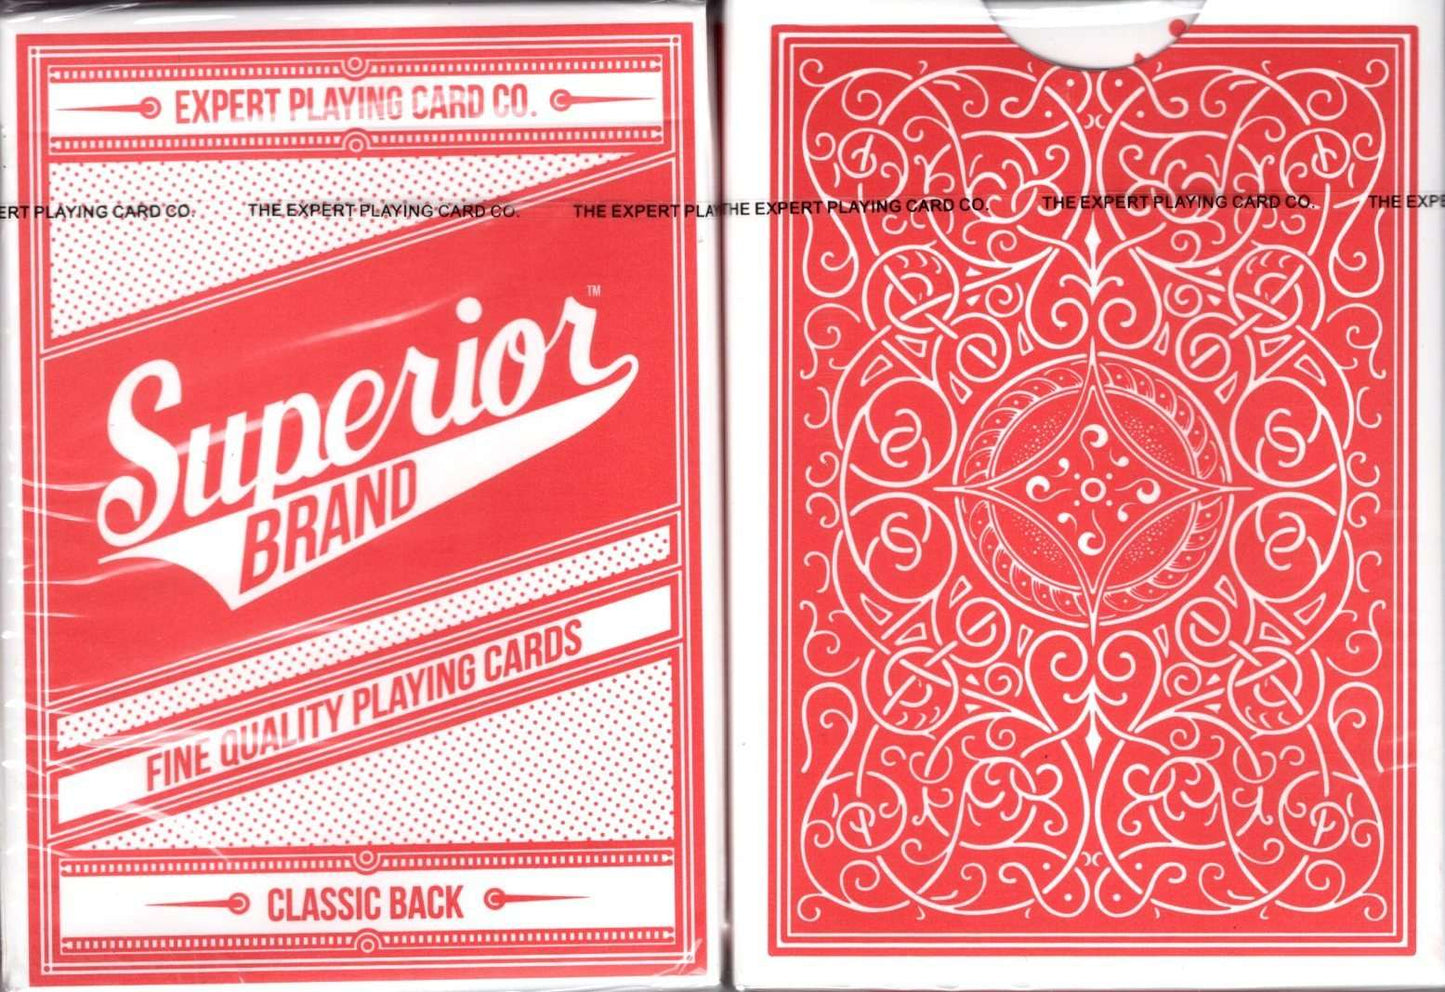 Superior Brand v2 Playing Cards EPCC